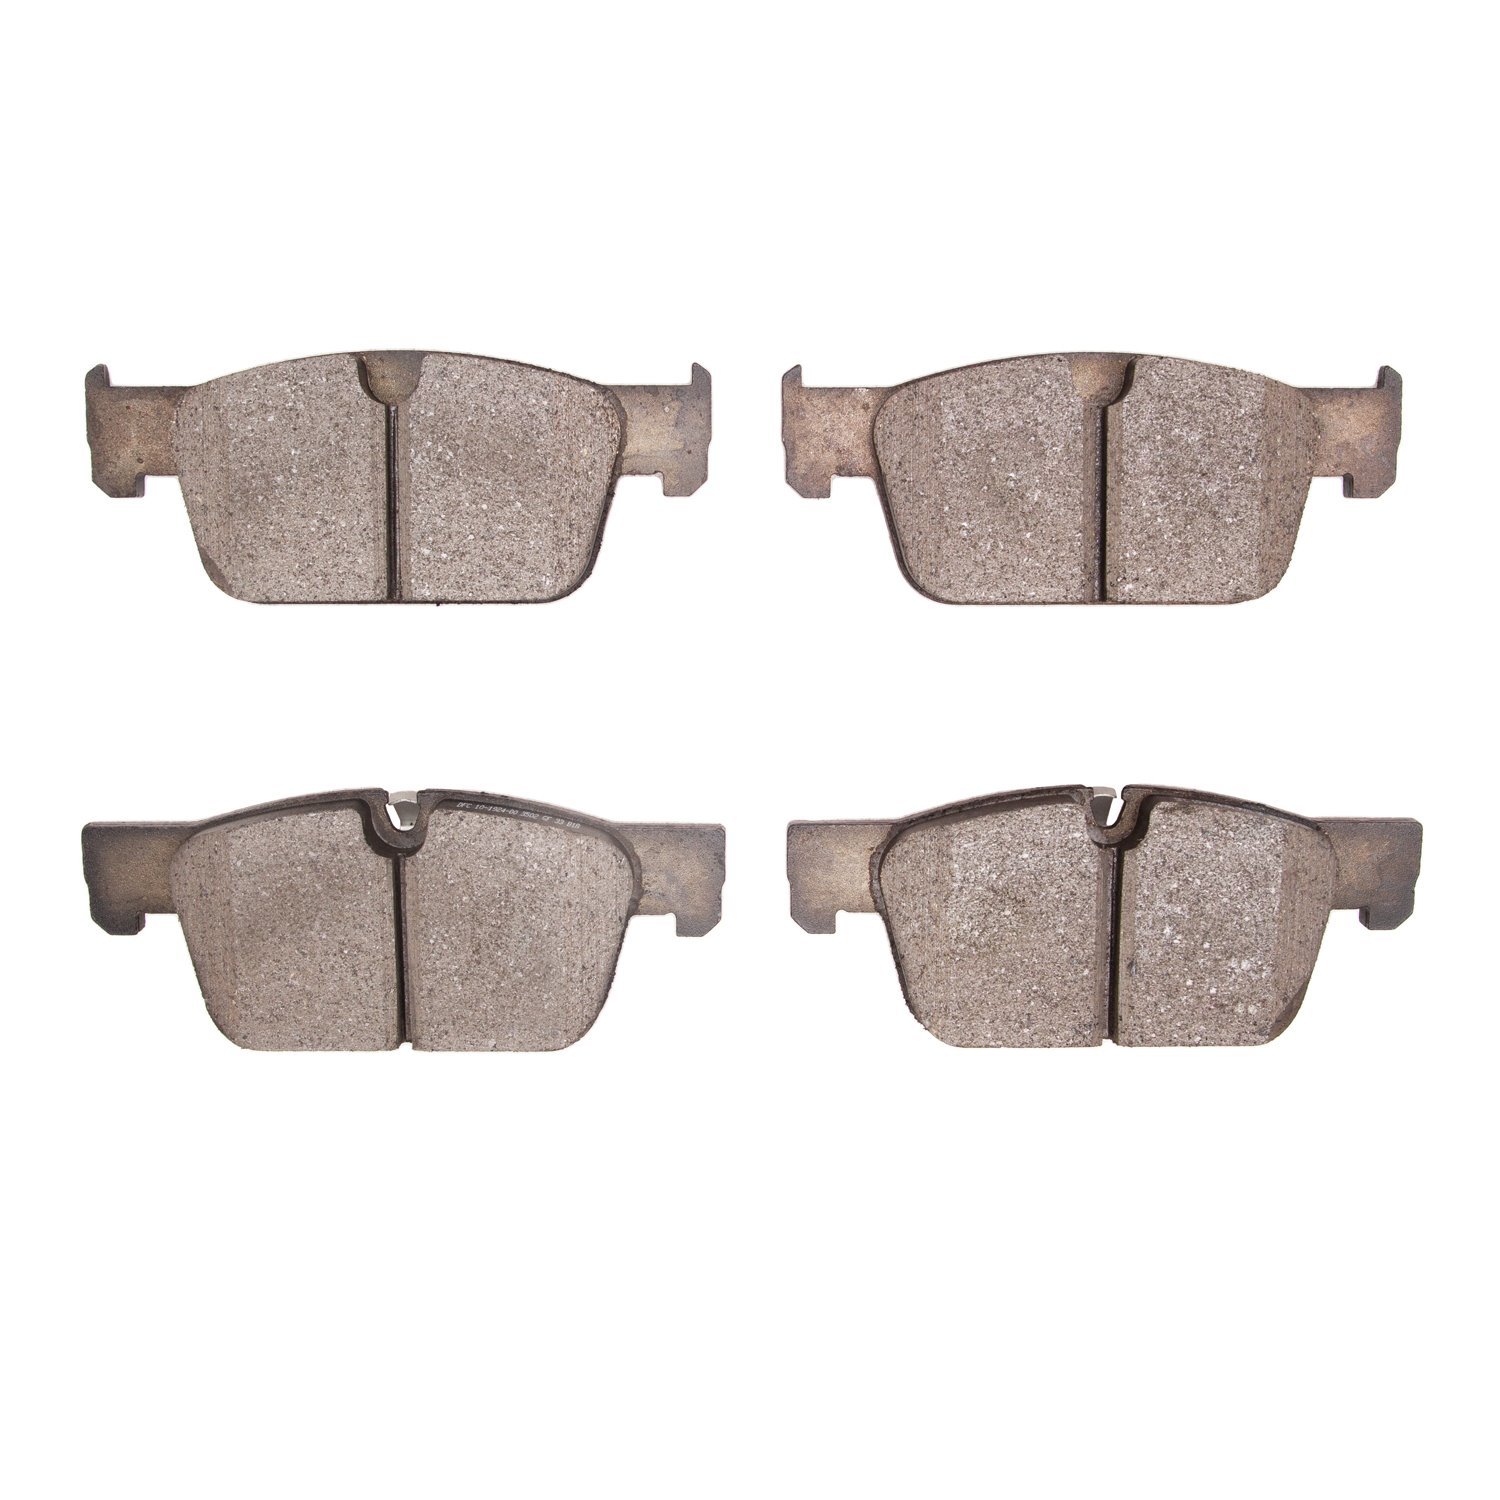 1600-1924-00 5000 Euro Ceramic Brake Pads, Fits Select Volvo, Position: Front